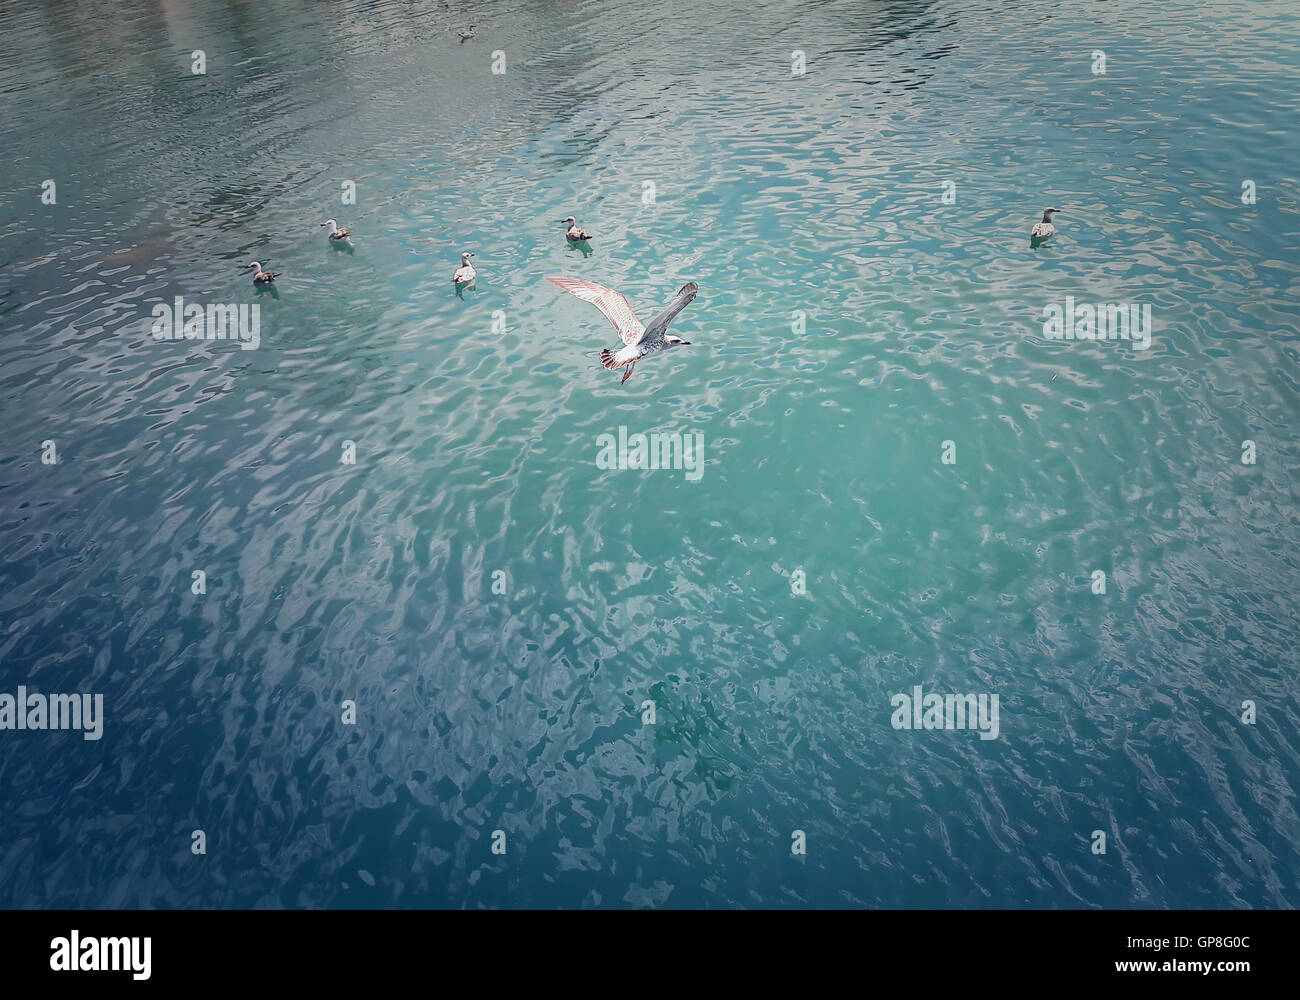 A group of seagulls in the water and one flying over Stock Photo